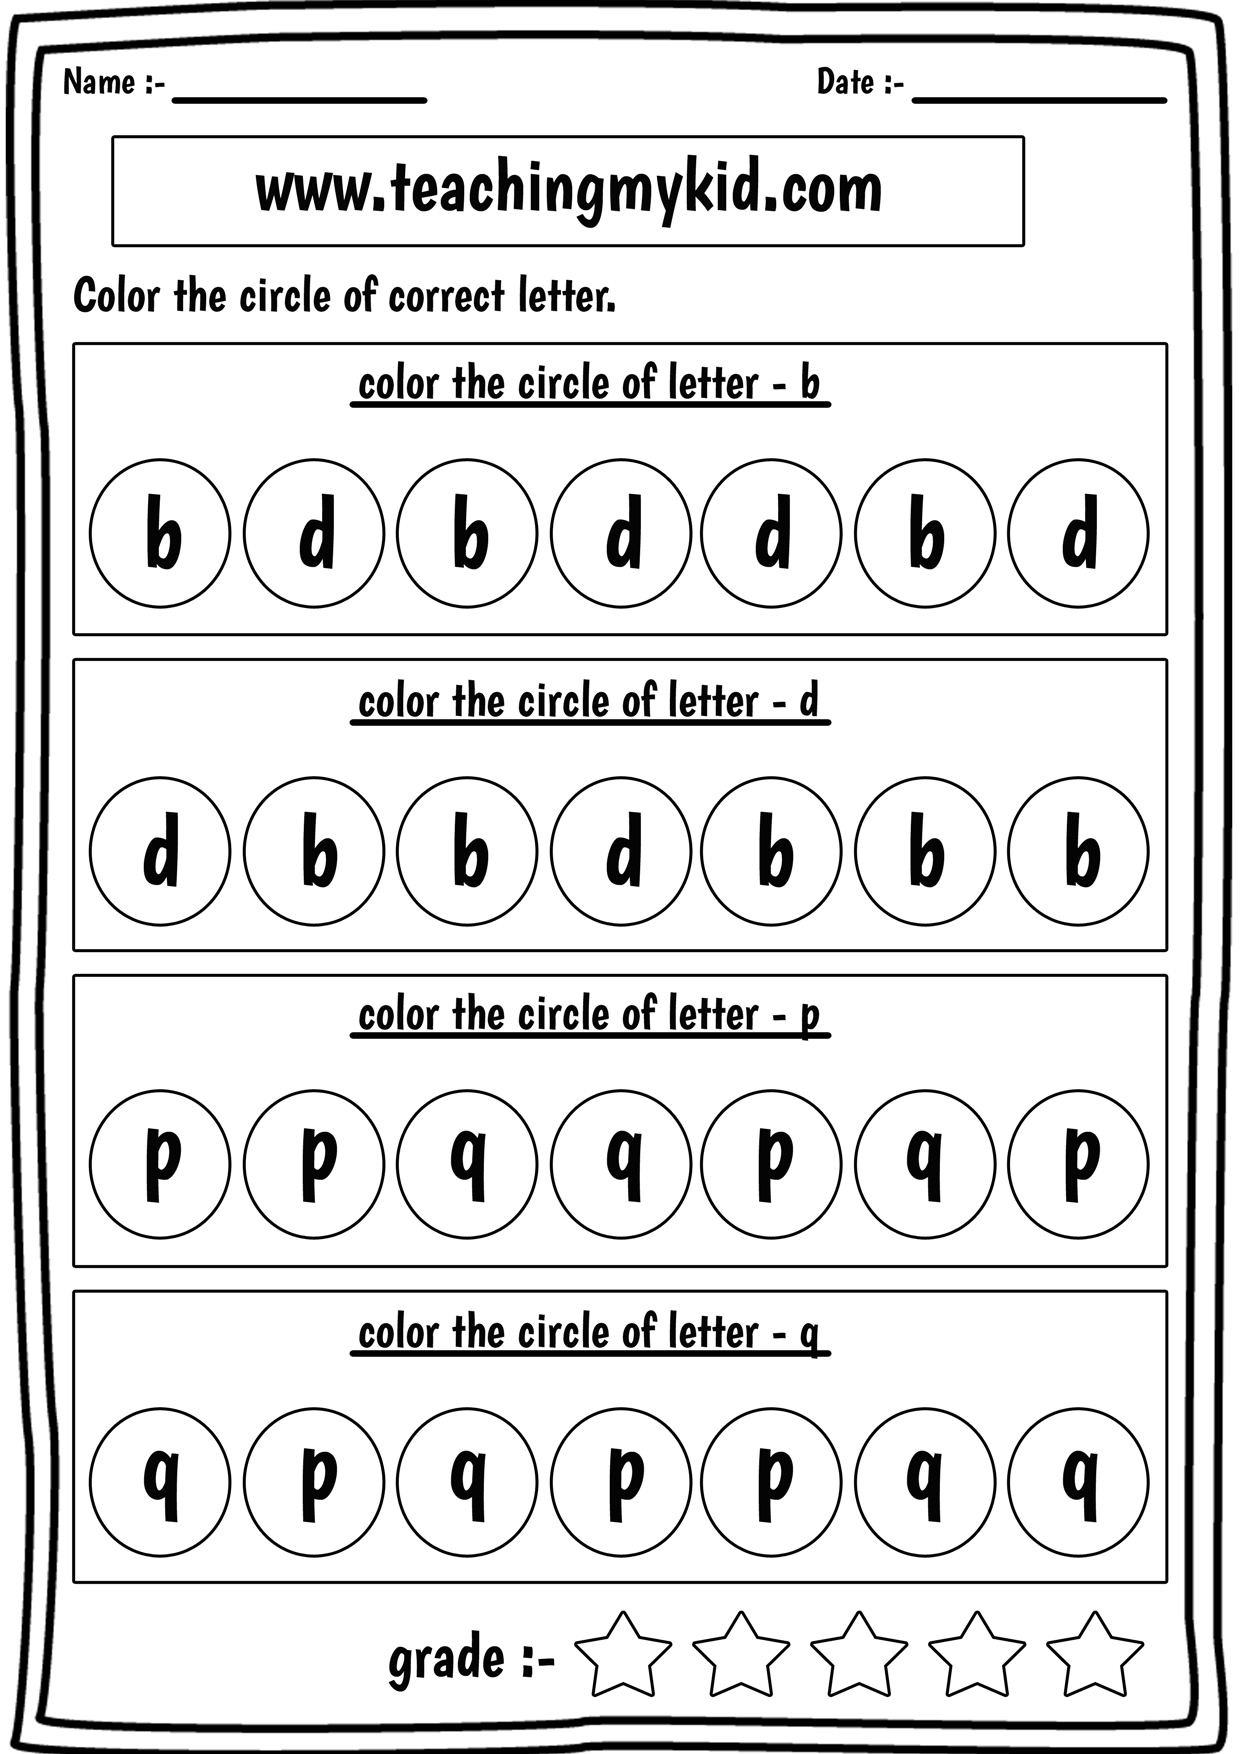 preschool printable worksheets - confusing letters b,d,p,q For B And D Confusion Worksheet